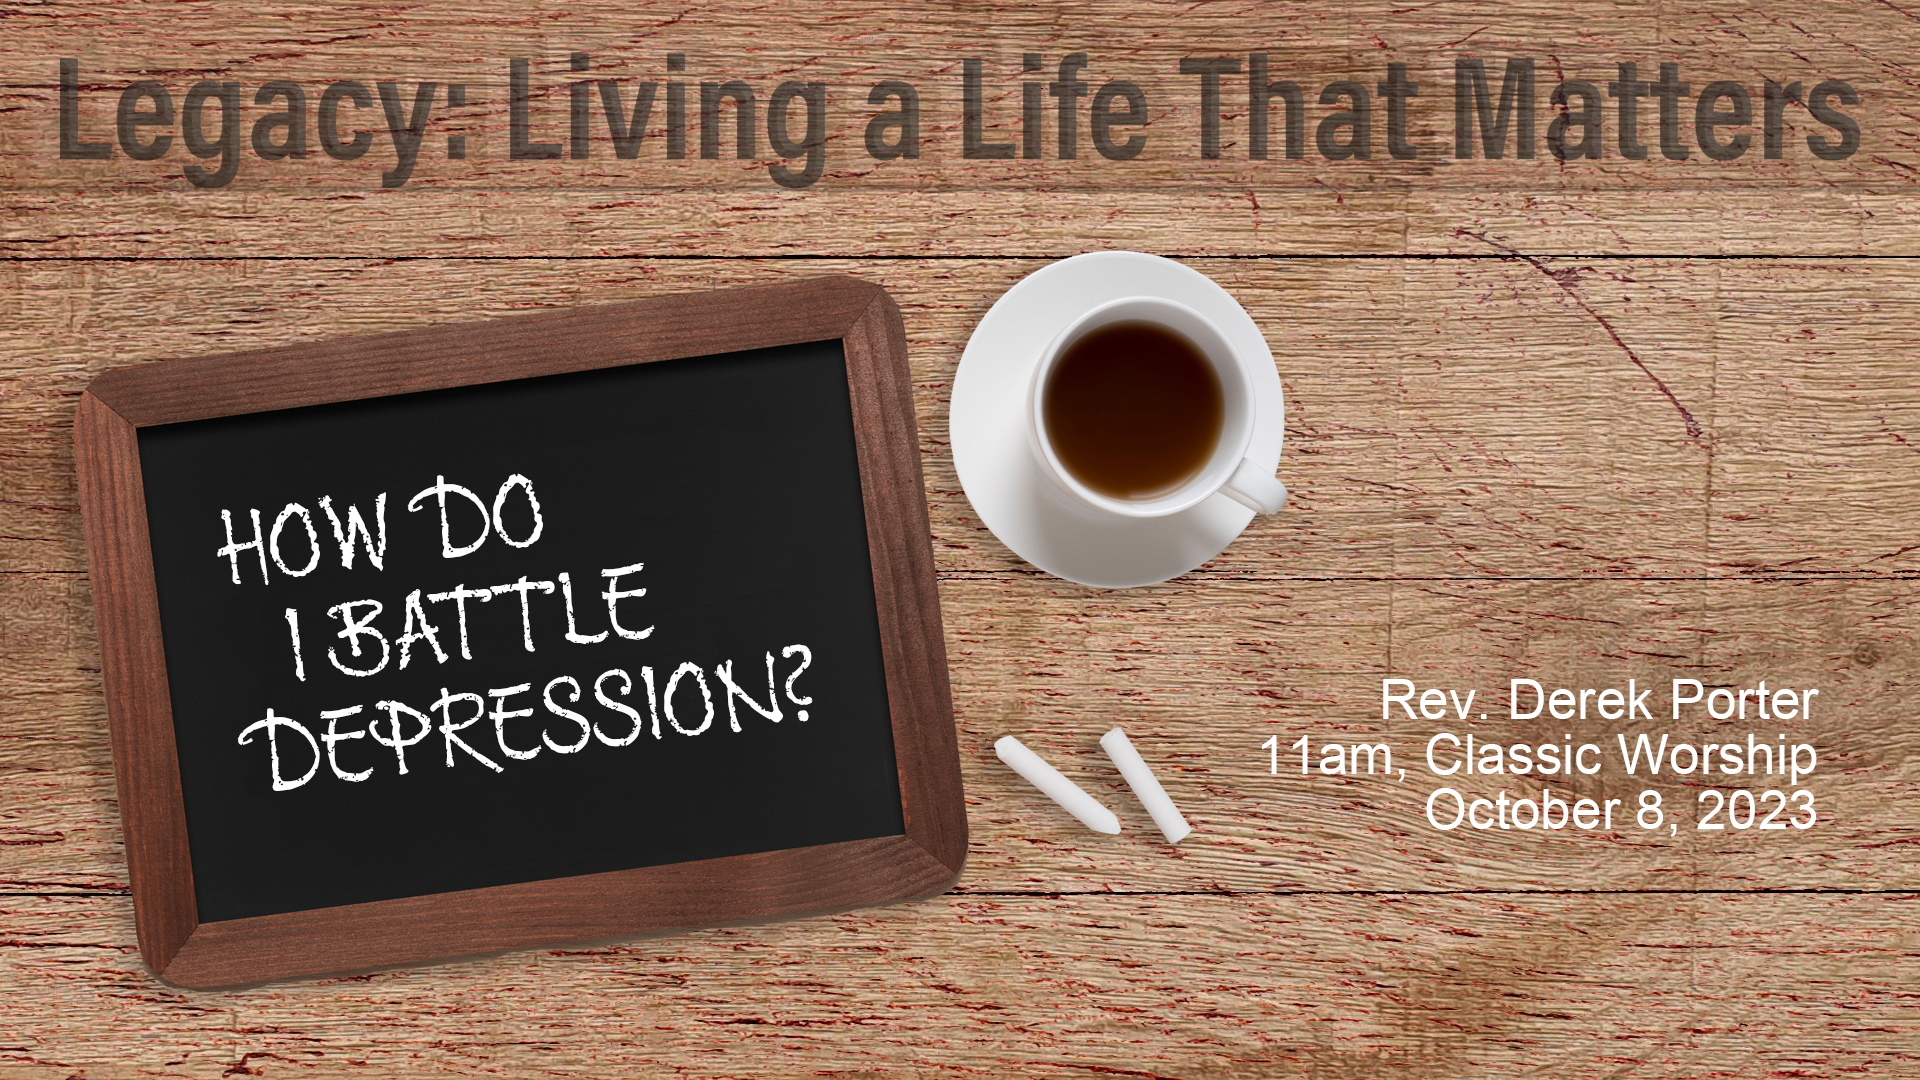 Legacy: Living a Life That Matters - How Do I Battle Depression?